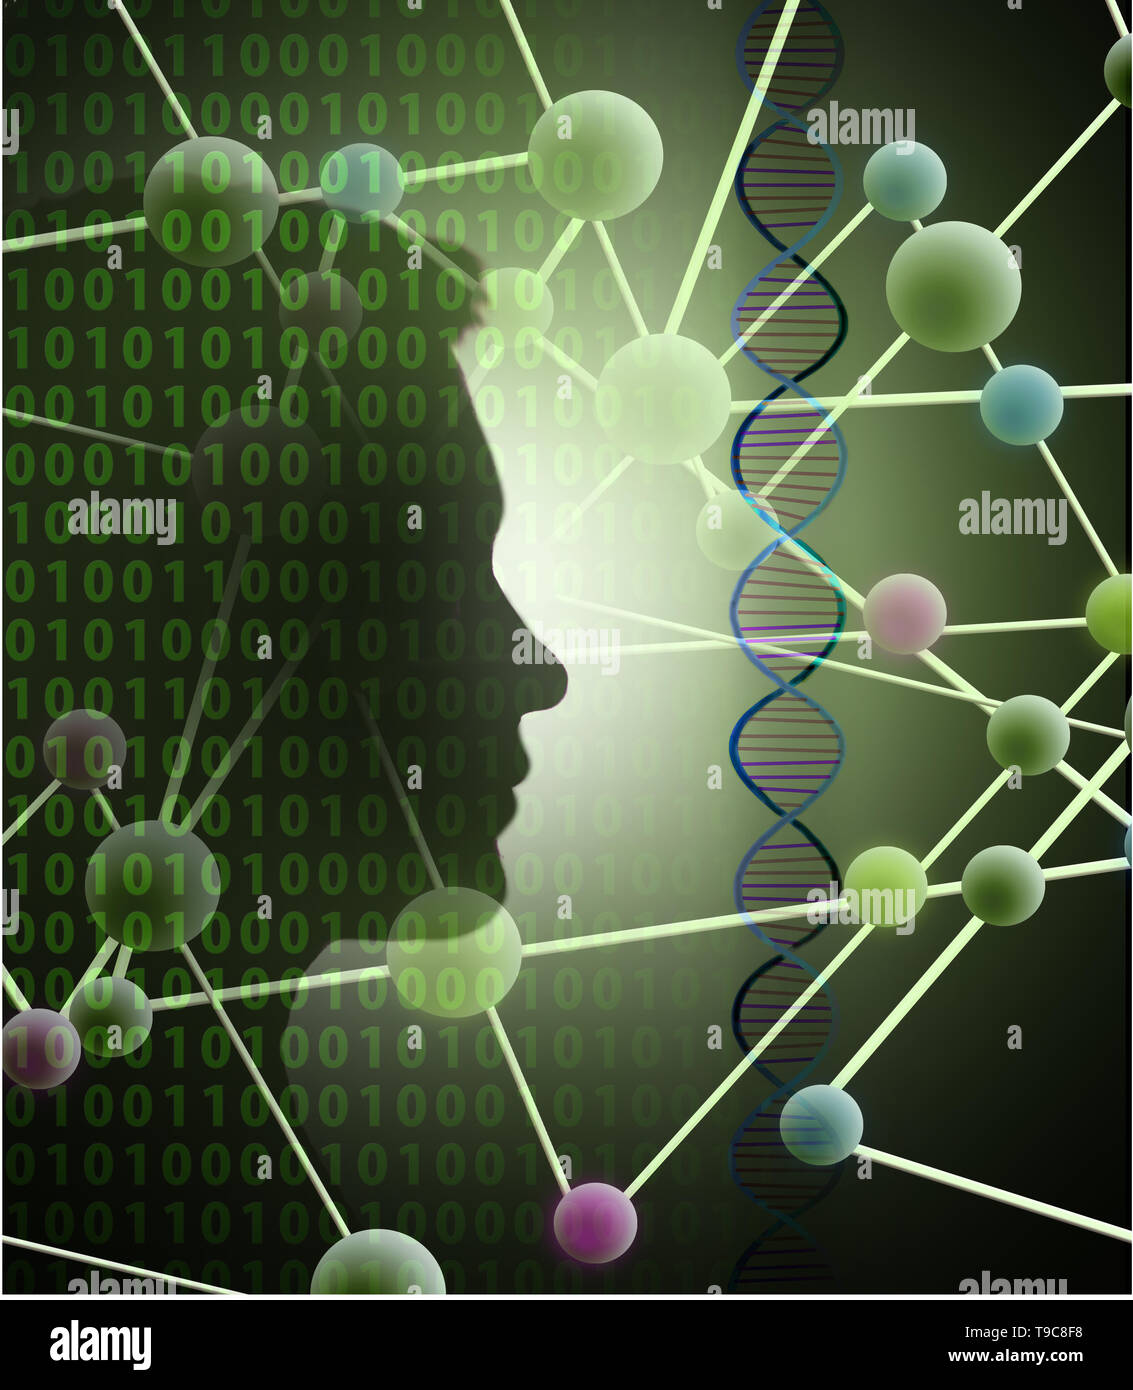 concept image of a mans profile collaged with a binary code double helix and atom structure depicting science and biotechnology Stock Photo